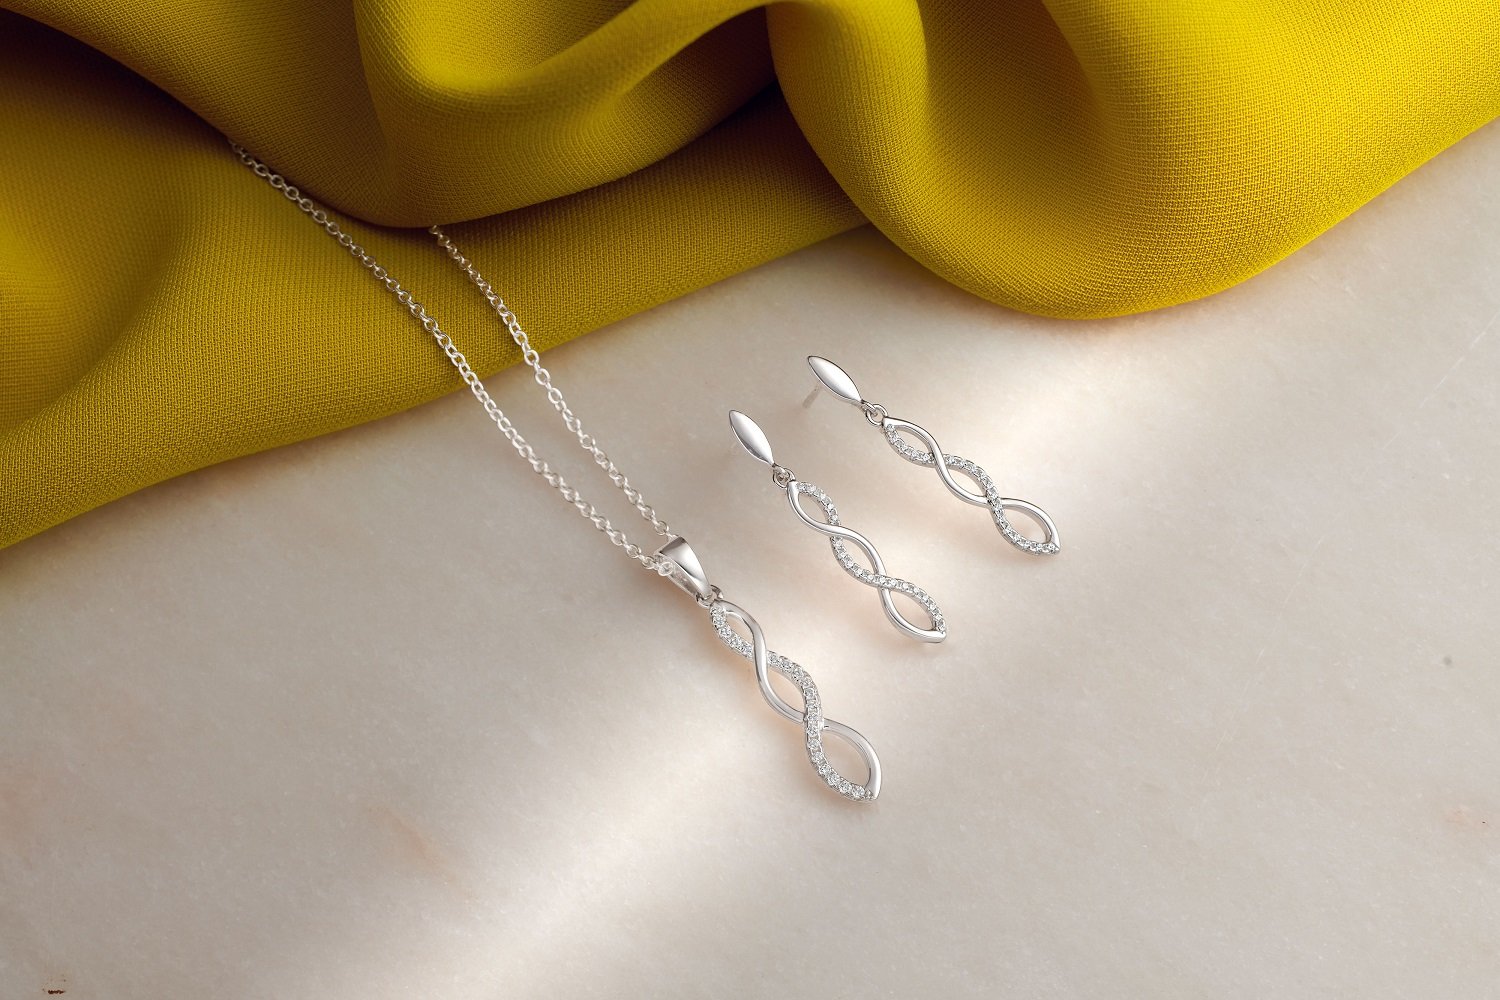 The Best Ways to Take Care of Sterling Silver Jewelry